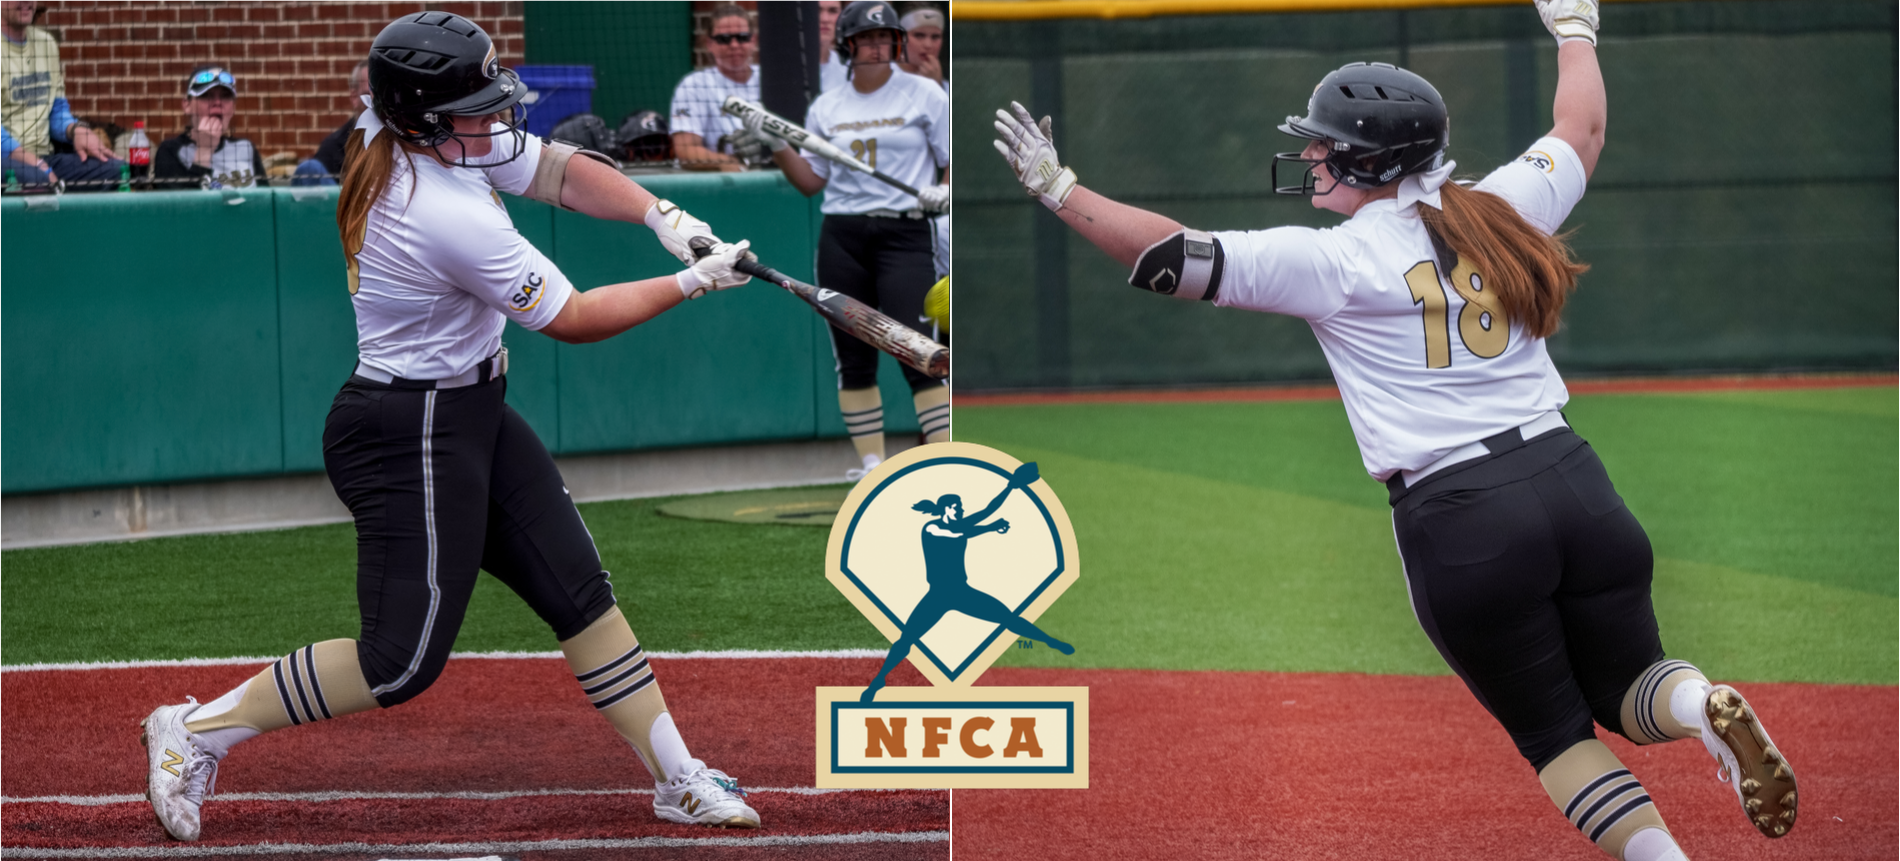 Boatner Earns The 2022 Division II Louisville Slugger/NFCA Player of the Week